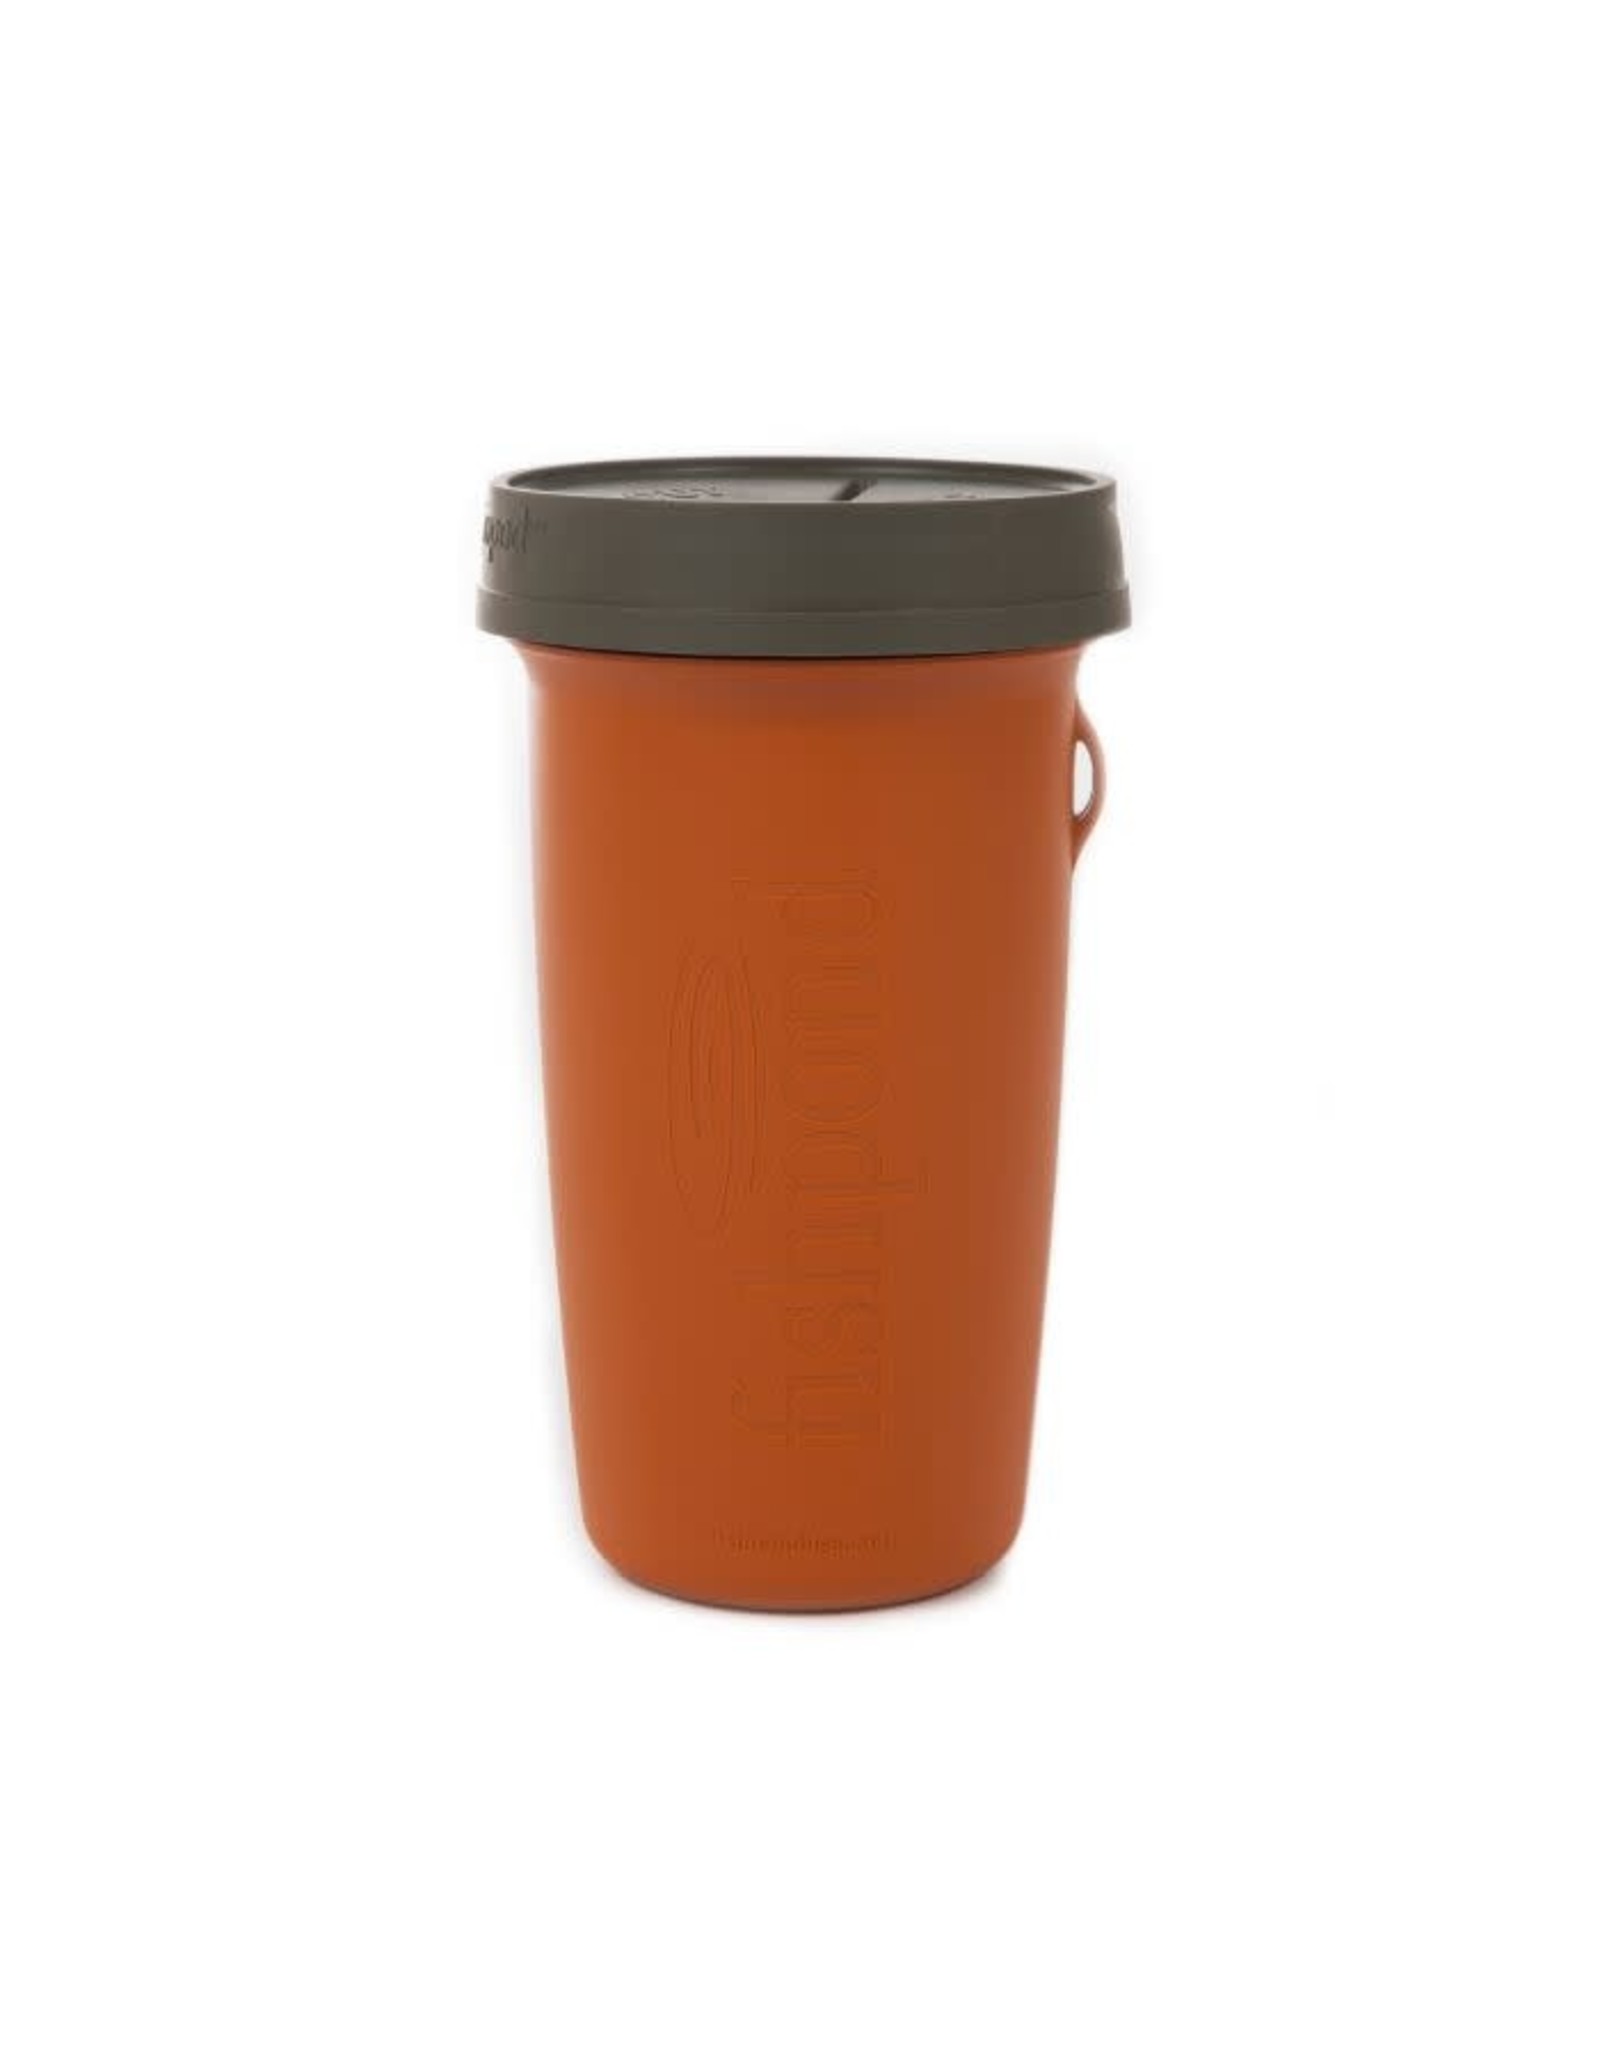 FISHPOND Fishpond PIOPOD (Pack It Out) Microtrash Container